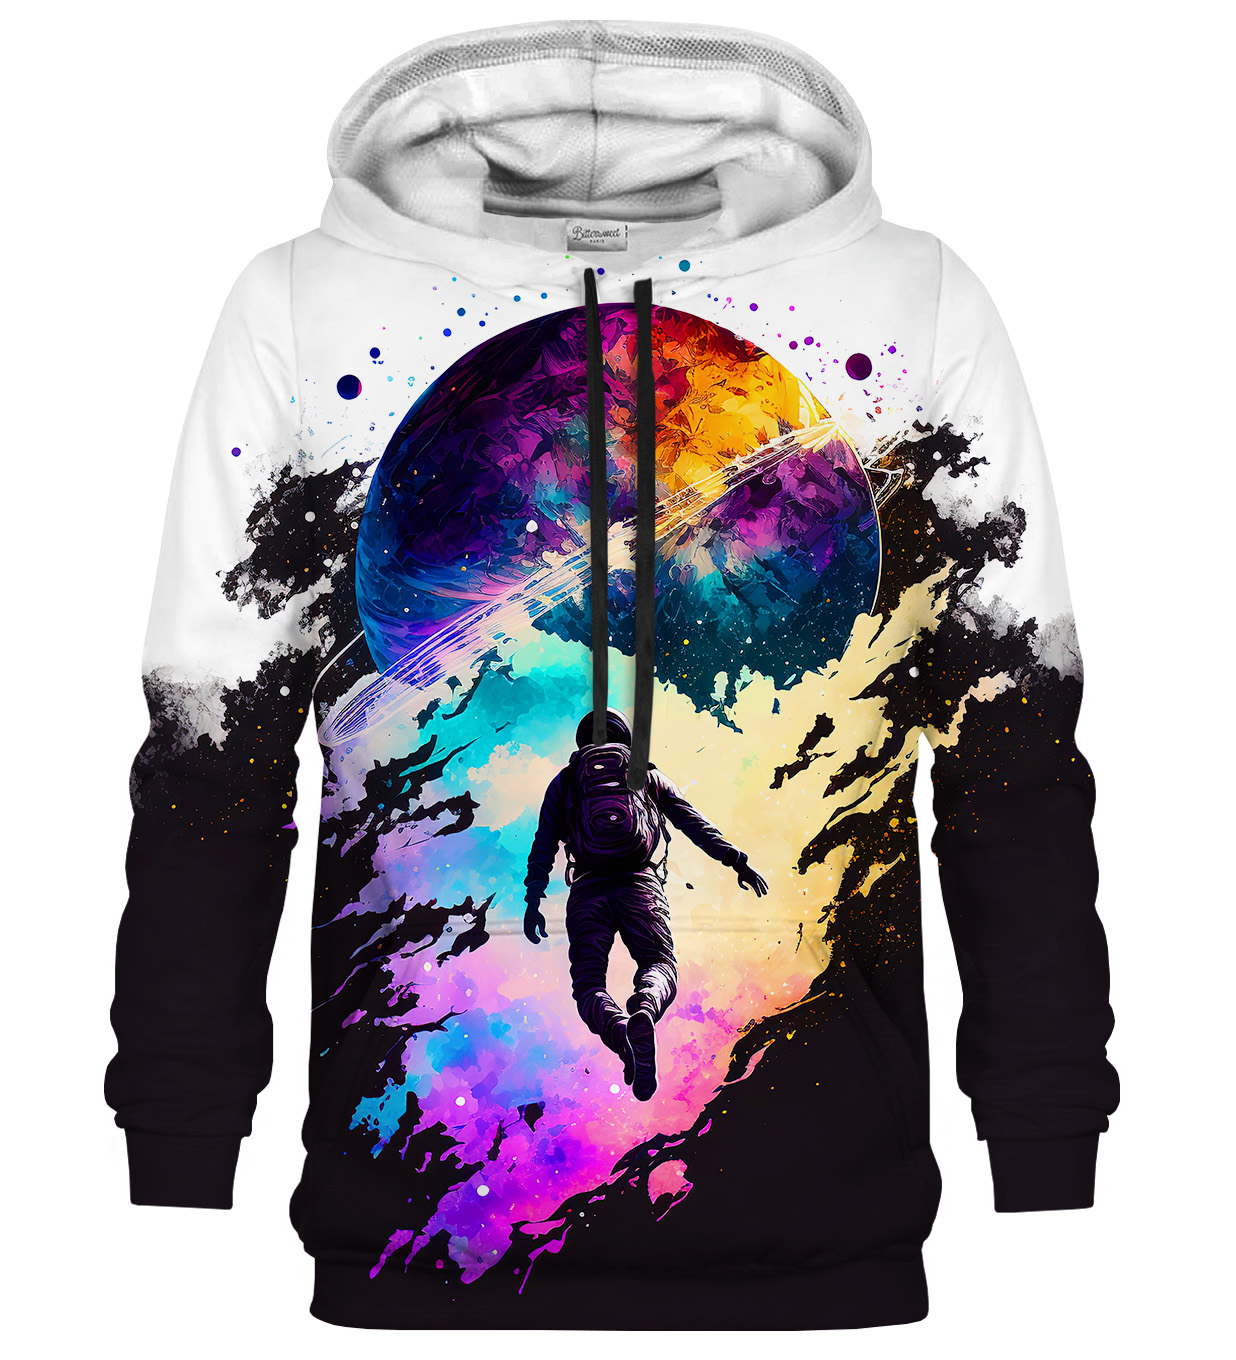 Searching For Colors Hoodie - L